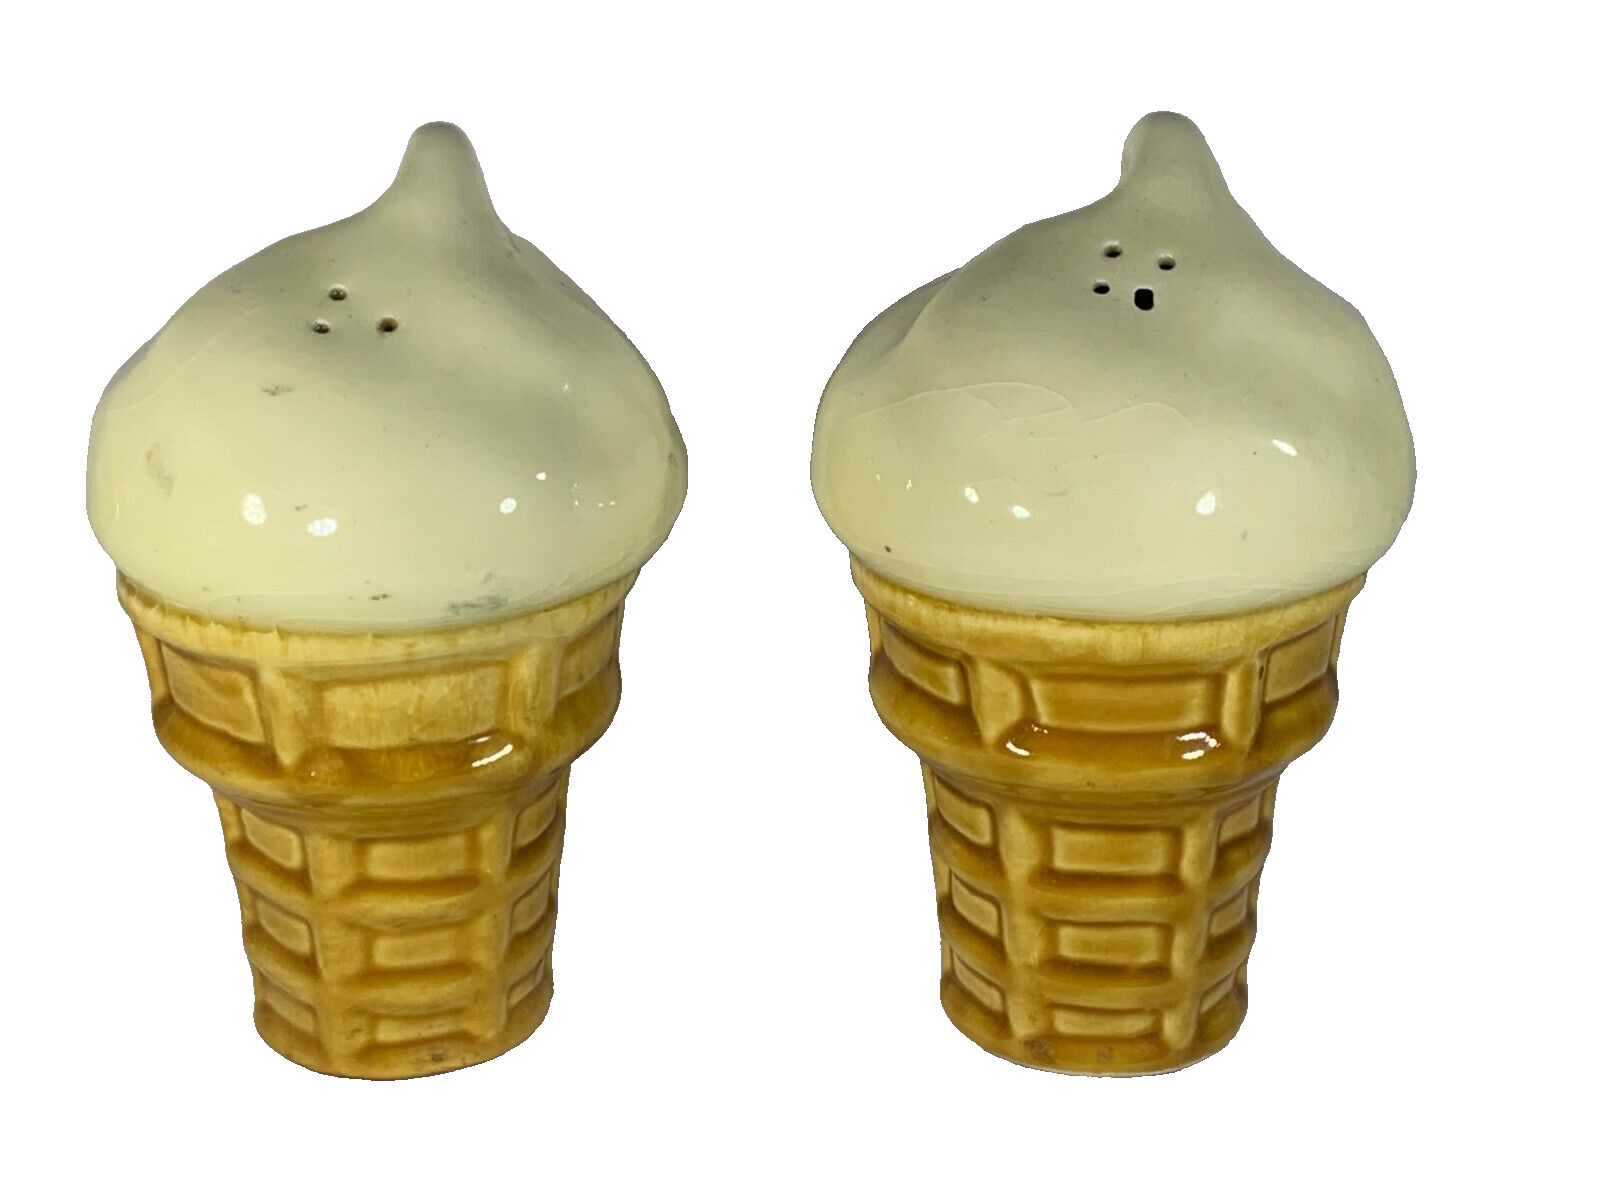 Vintage McCoy Pottery Ice Cream Cone Salt and Pepper Shakers Set Creamy White